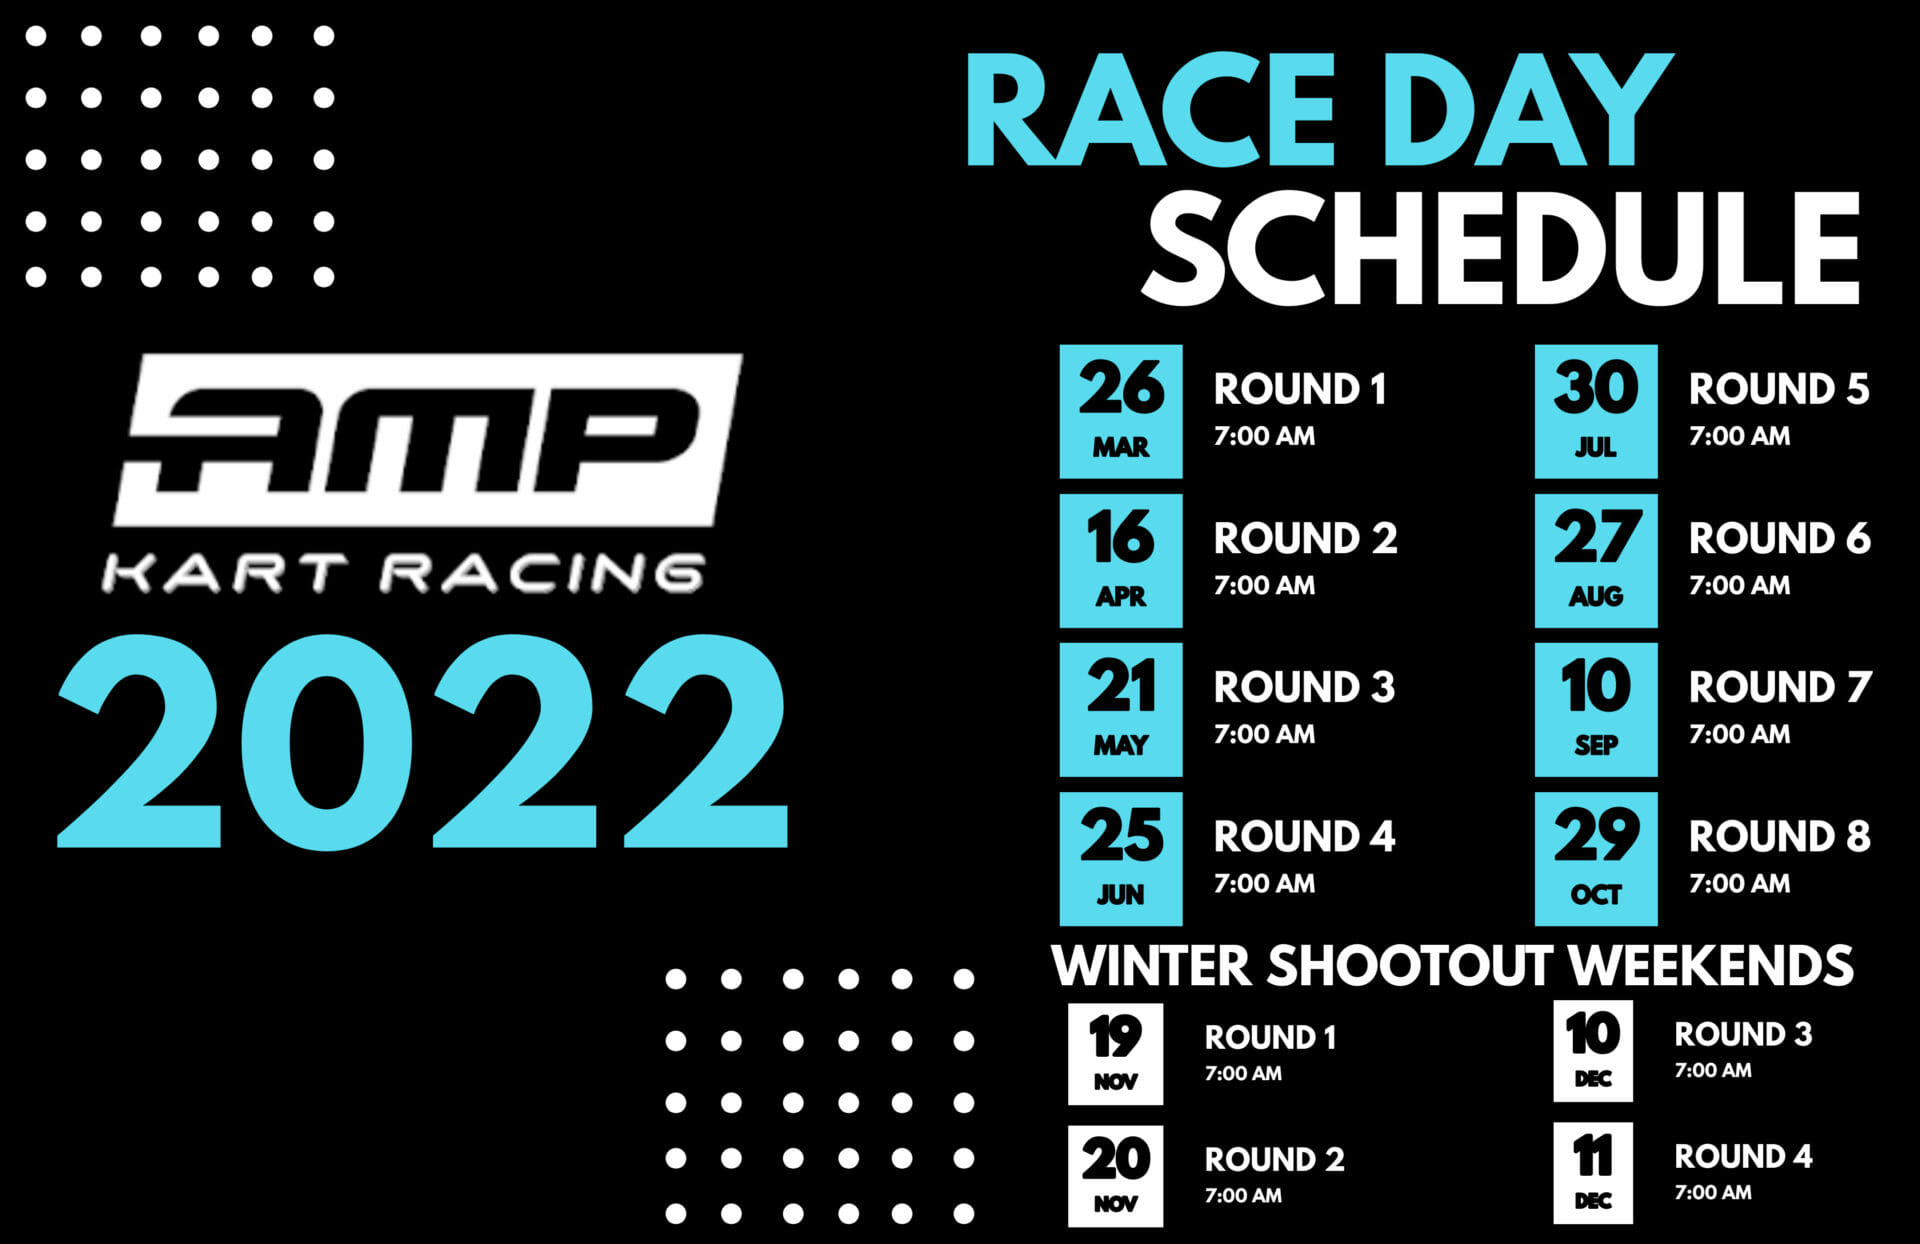 2022 Race Day Schedule - Race Series